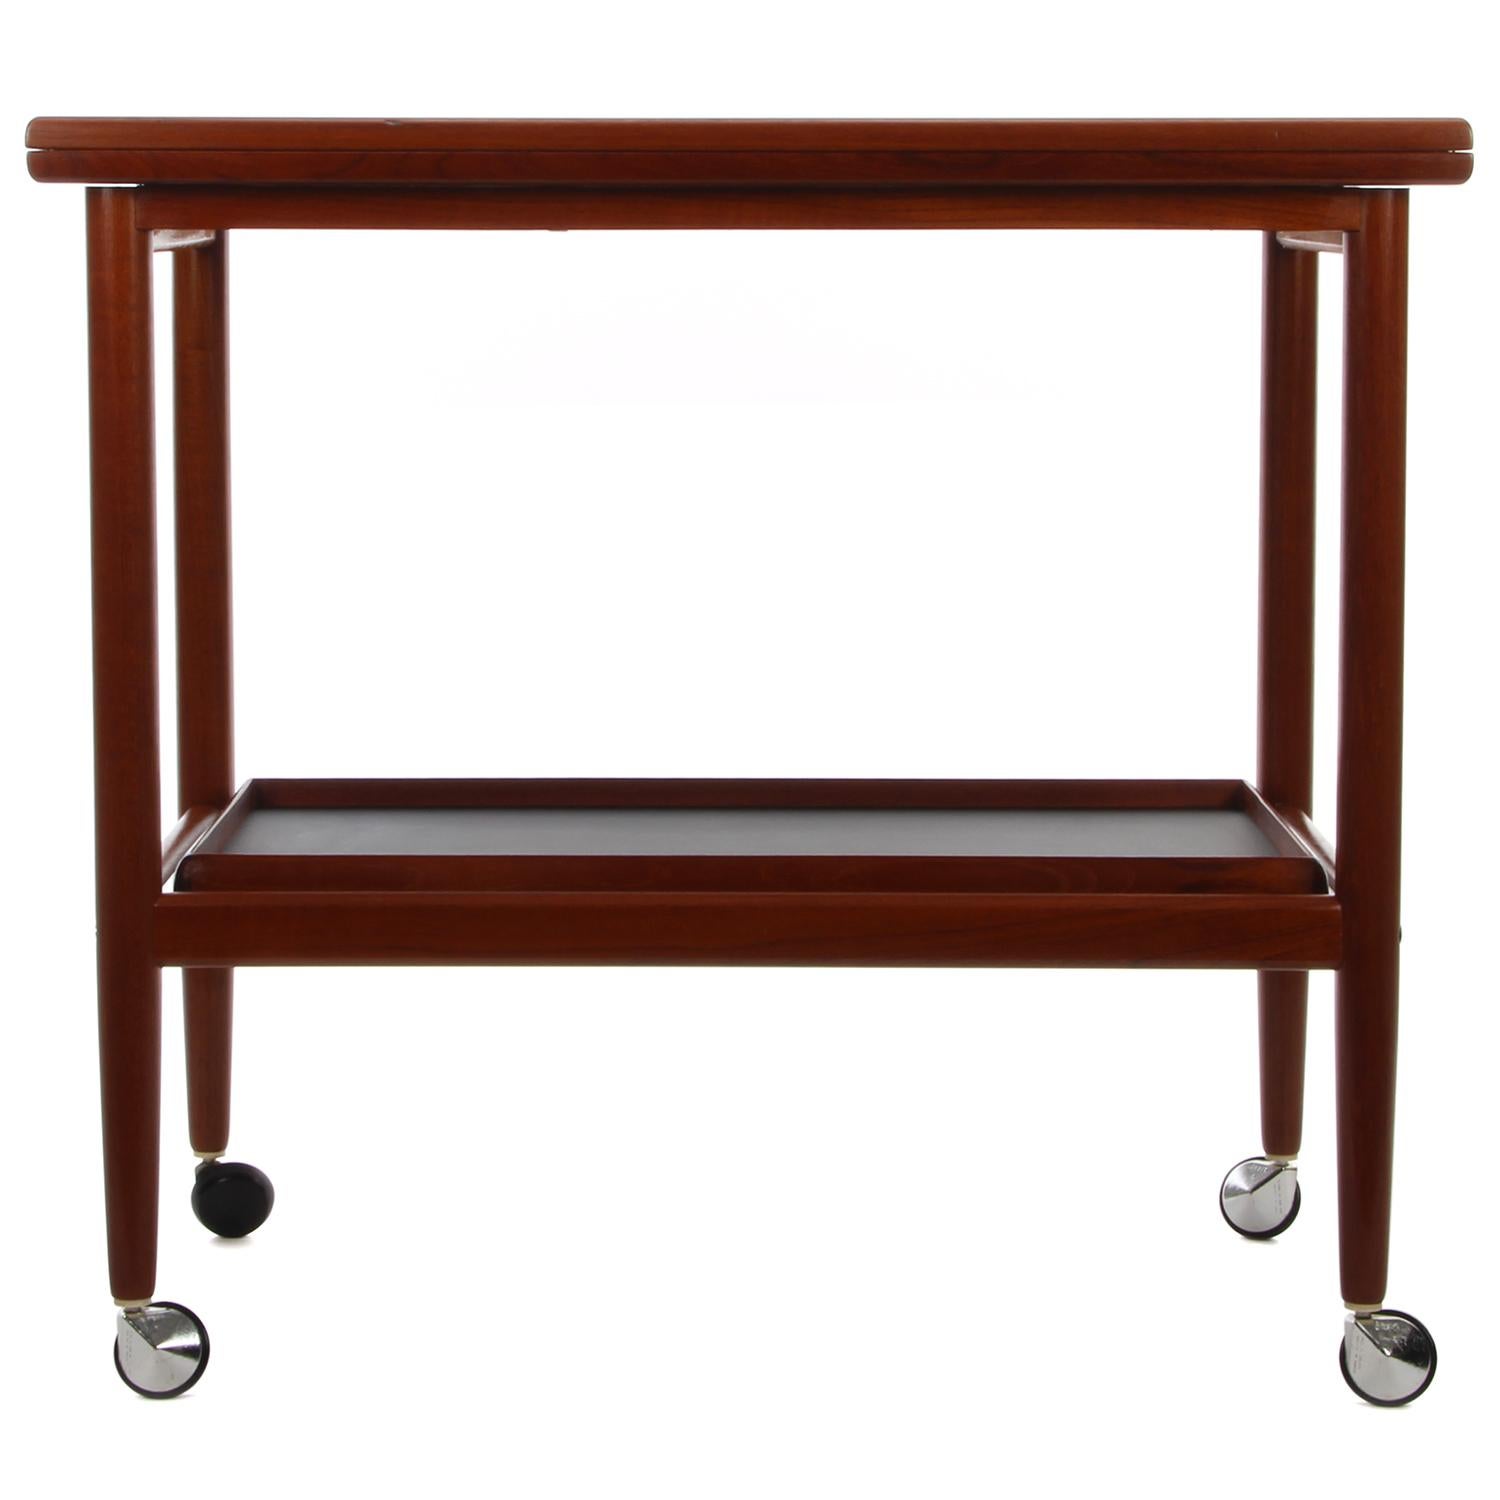 Mid-Century Modern Teak Serving Cart by Ole Wanscher for P.Jeppesen in the 1950s